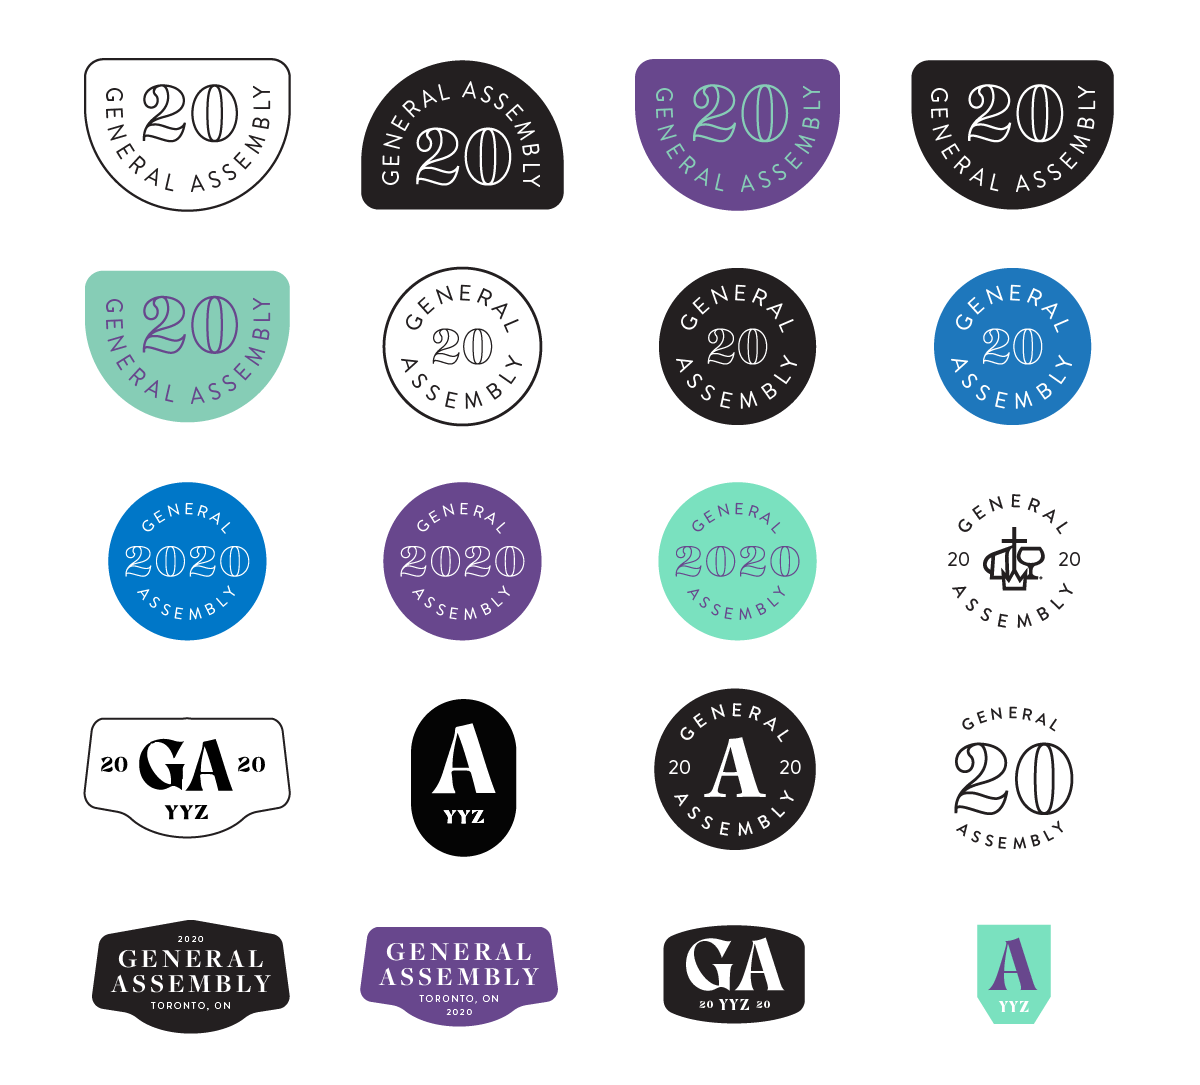 Typography badges for The Alliance Canada's General Assembly